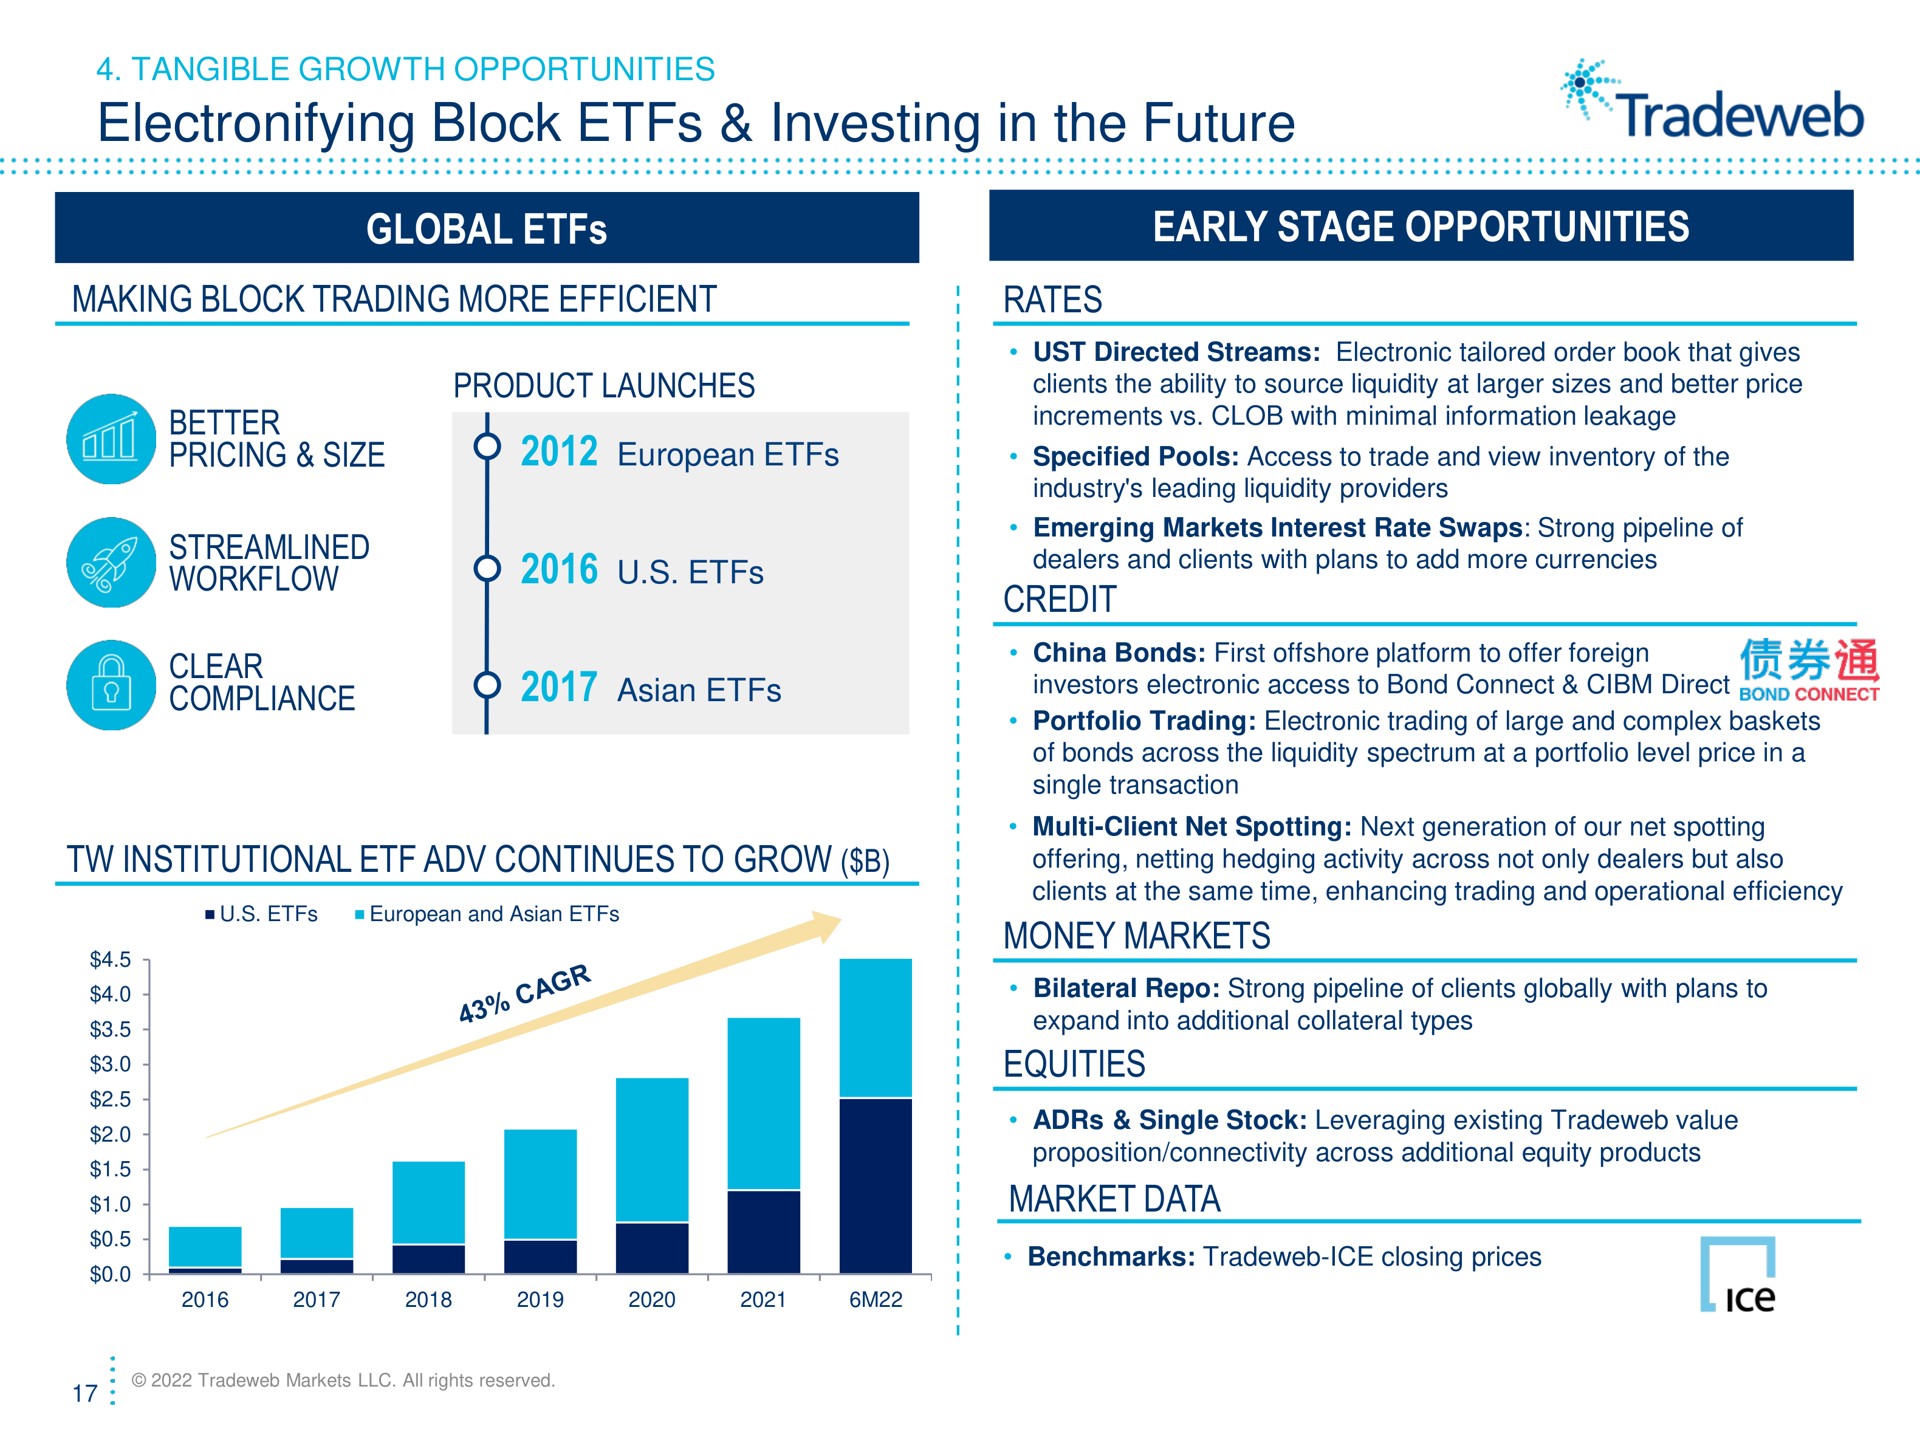 block investing in the future global early stage opportunities making block trading more efficient rates better pricing size streamlined clear compliance product launches institutional continues to grow credit money markets equities market data tangible growth cone ust directed streams electronic tailored order book that gives clients ability source liquidity at sizes and price increments with minimal information leakage specified pools access trade and view inventory of industry leading liquidity providers emerging interest rate swaps strong pipeline of i investors electronic access bond connect direct portfolio electronic of large and complex baskets of bonds across liquidity spectrum at a portfolio level price a single transaction offering netting hedging activity across not only dealers but also clients at same time enhancing and operational efficiency woe bilateral strong pipeline of clients globally with plans expand into additional collateral types single stock leveraging existing value proposition connectivity across additional equity products a ice closing prices ice | Tradeweb